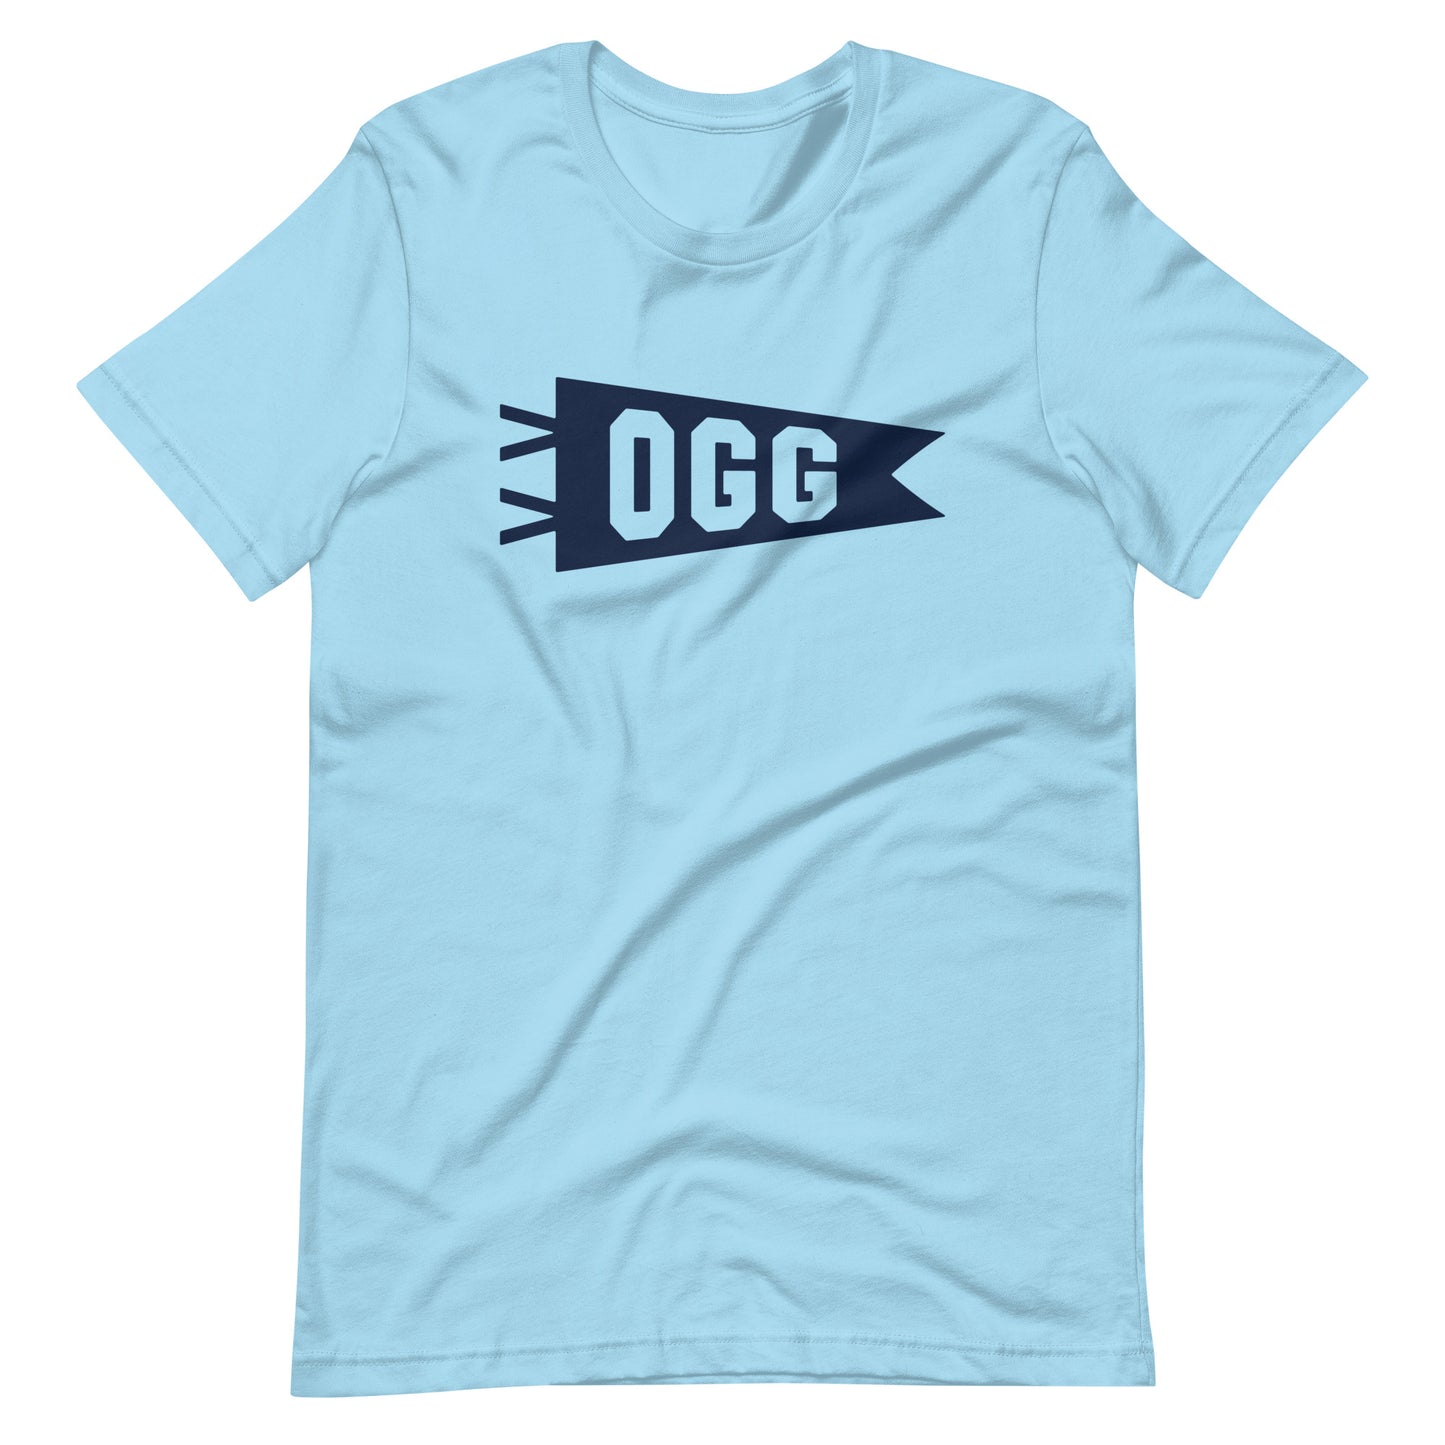 Airport Code T-Shirt - Navy Blue Graphic • OGG Maui • YHM Designs - Image 10